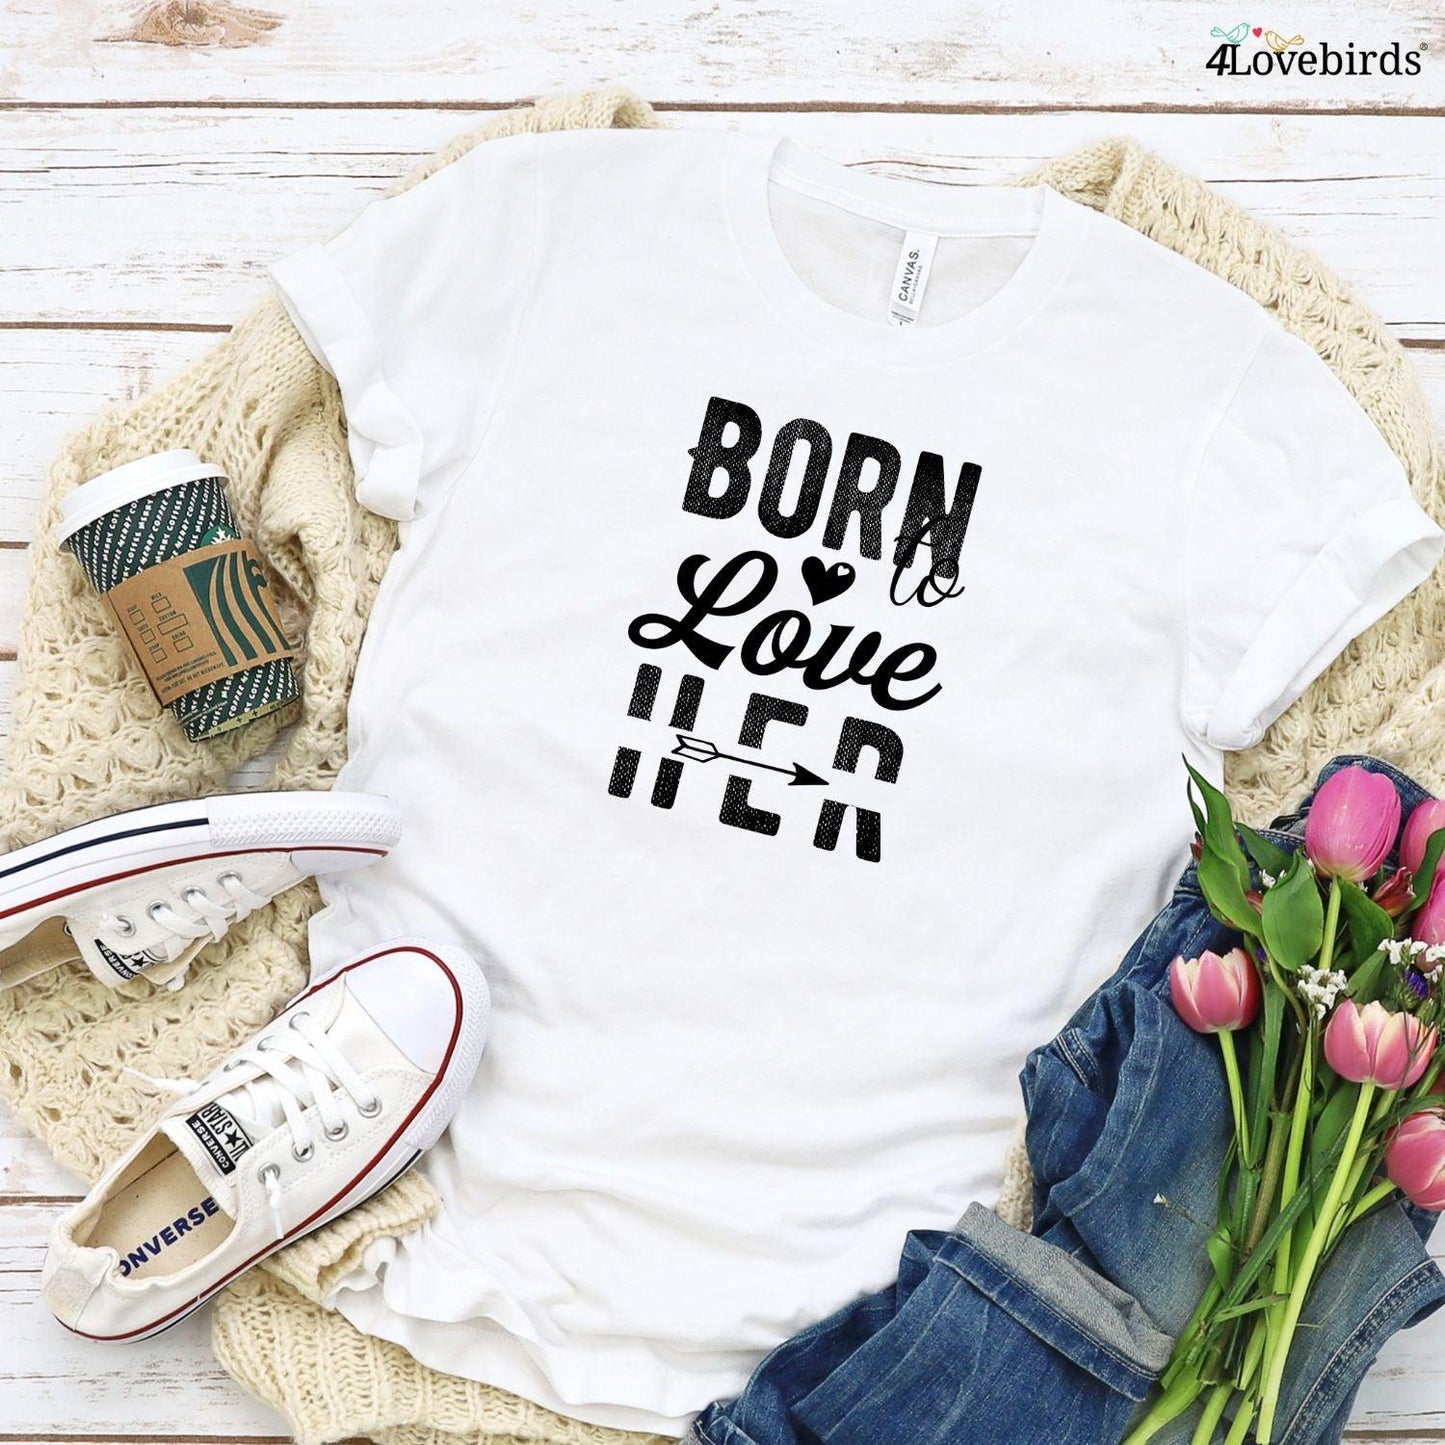 Matching Set Outfits: 'Born to Love Him/Her' - Chic and Cozy Couple Attire - 4Lovebirds